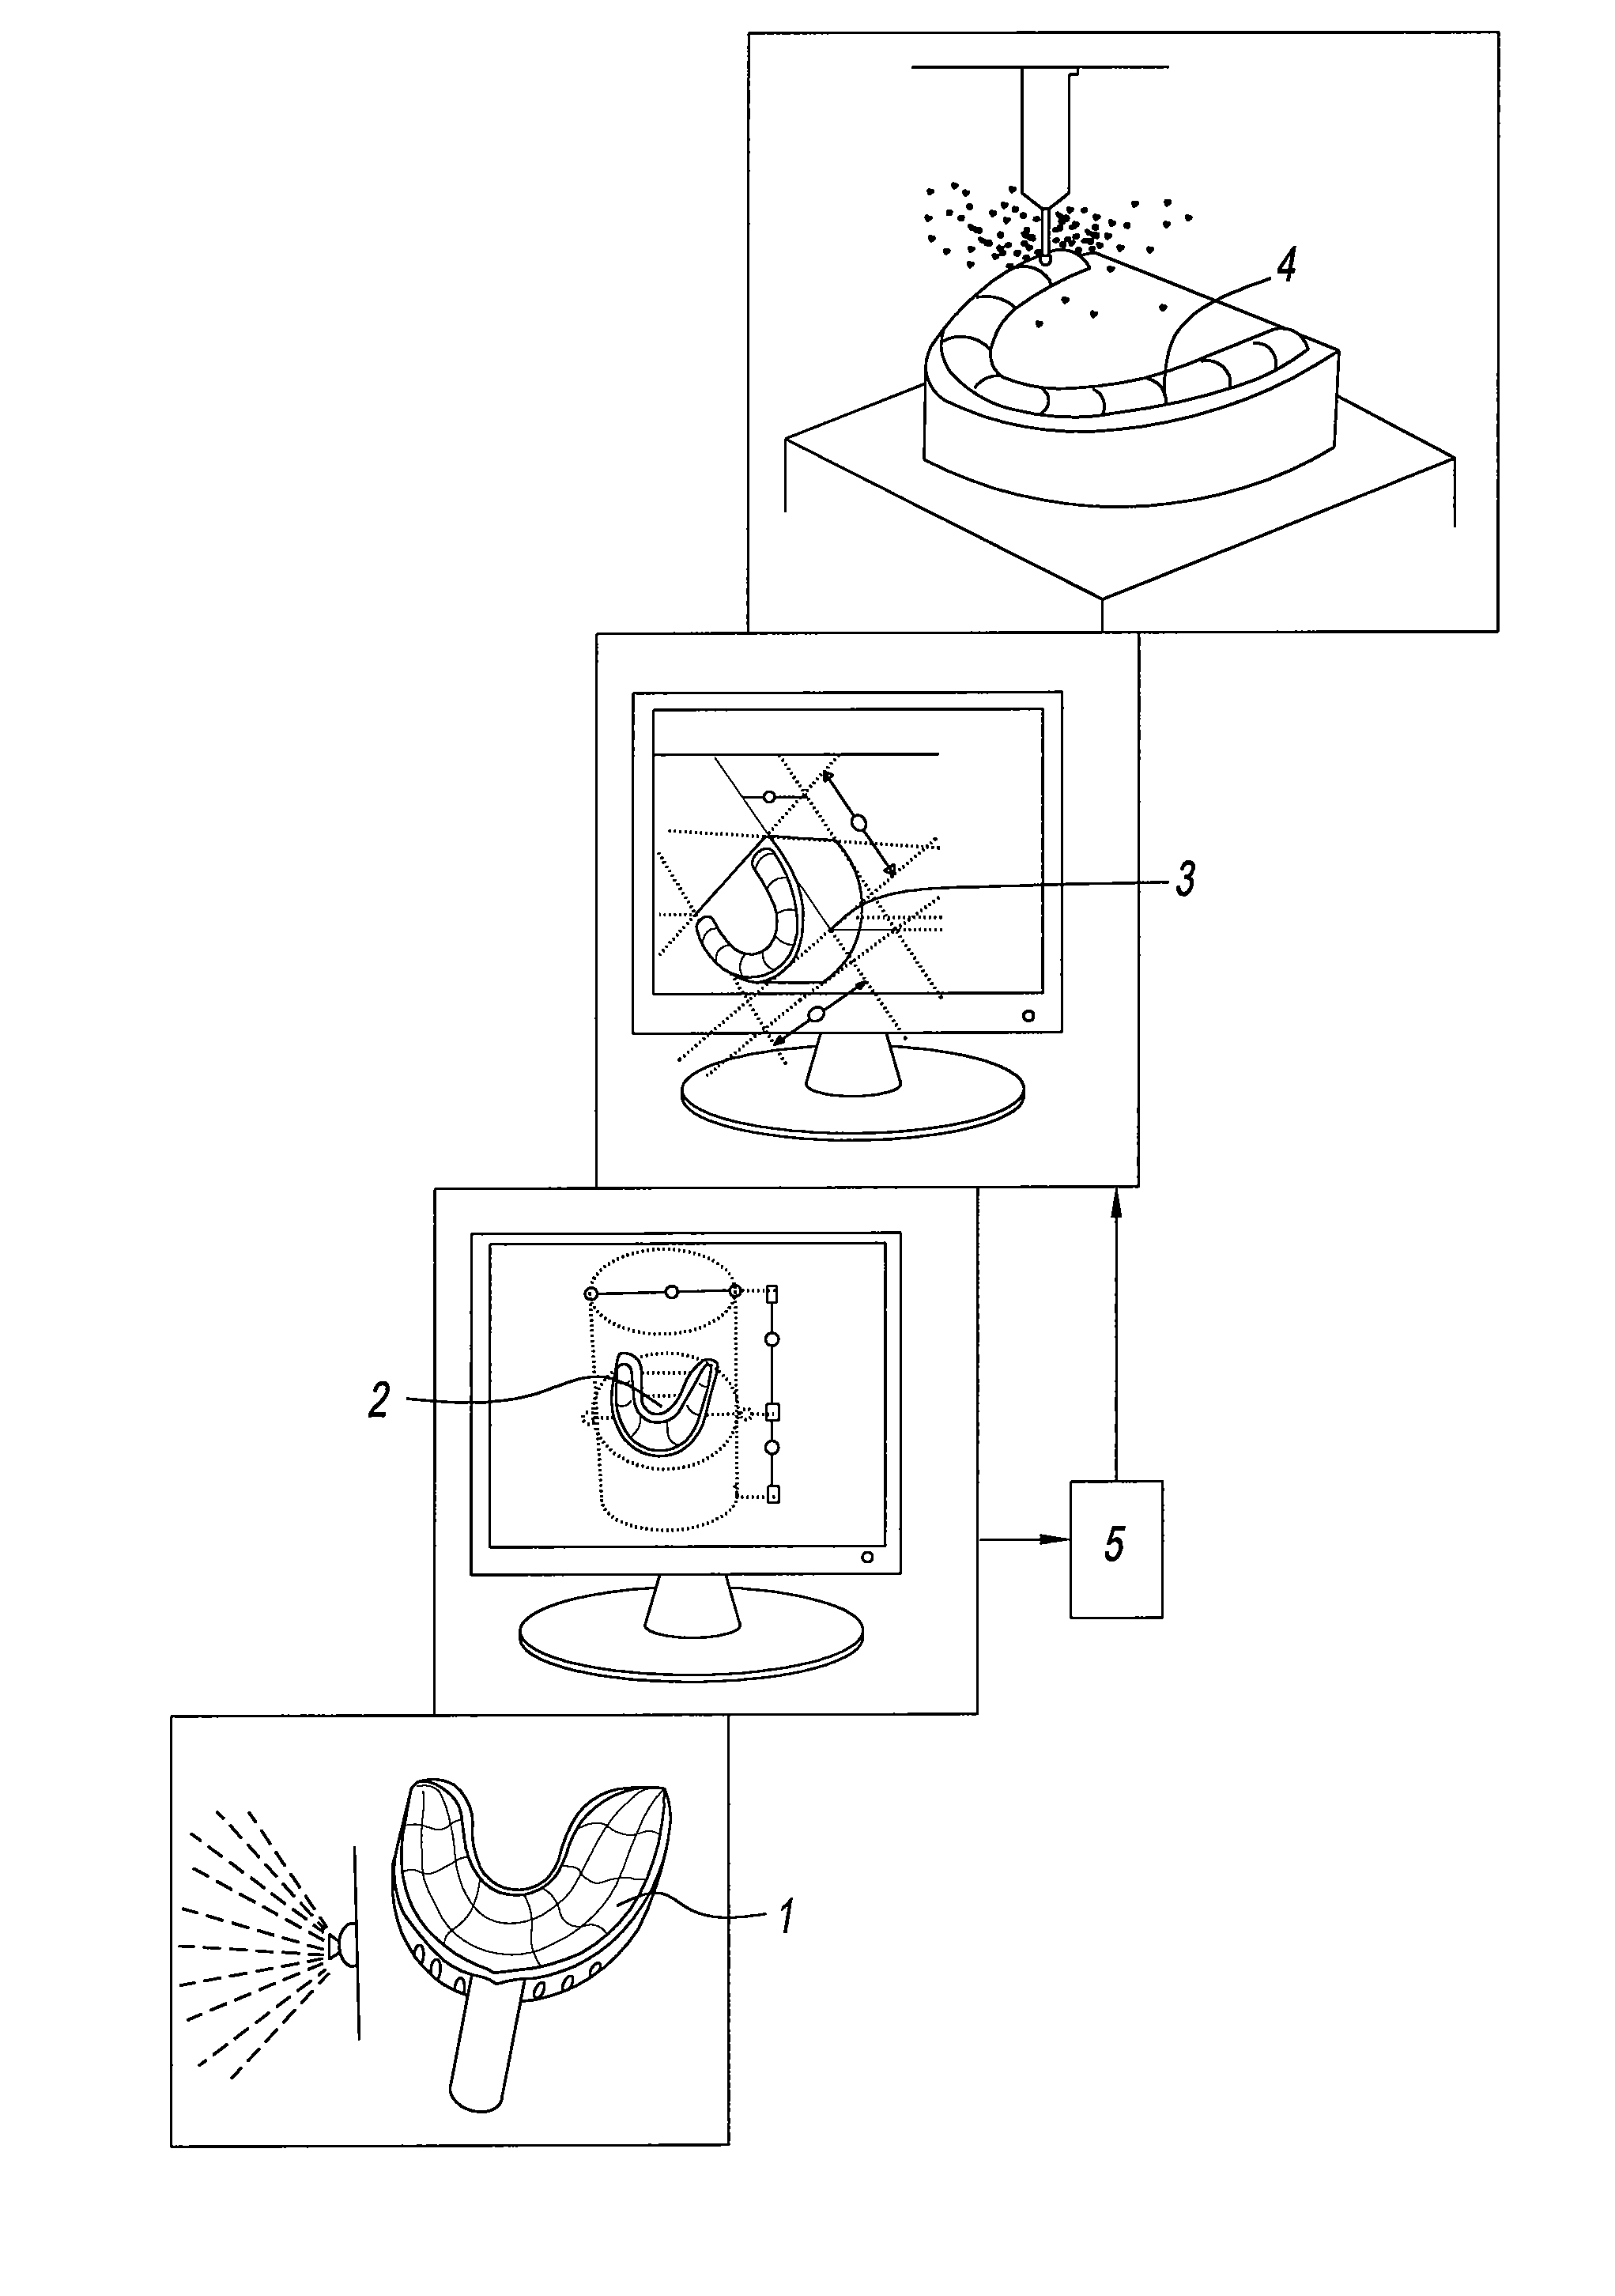 Methods and Apparatus for Producing Dental Stones Base Plates Used in Making Dentures